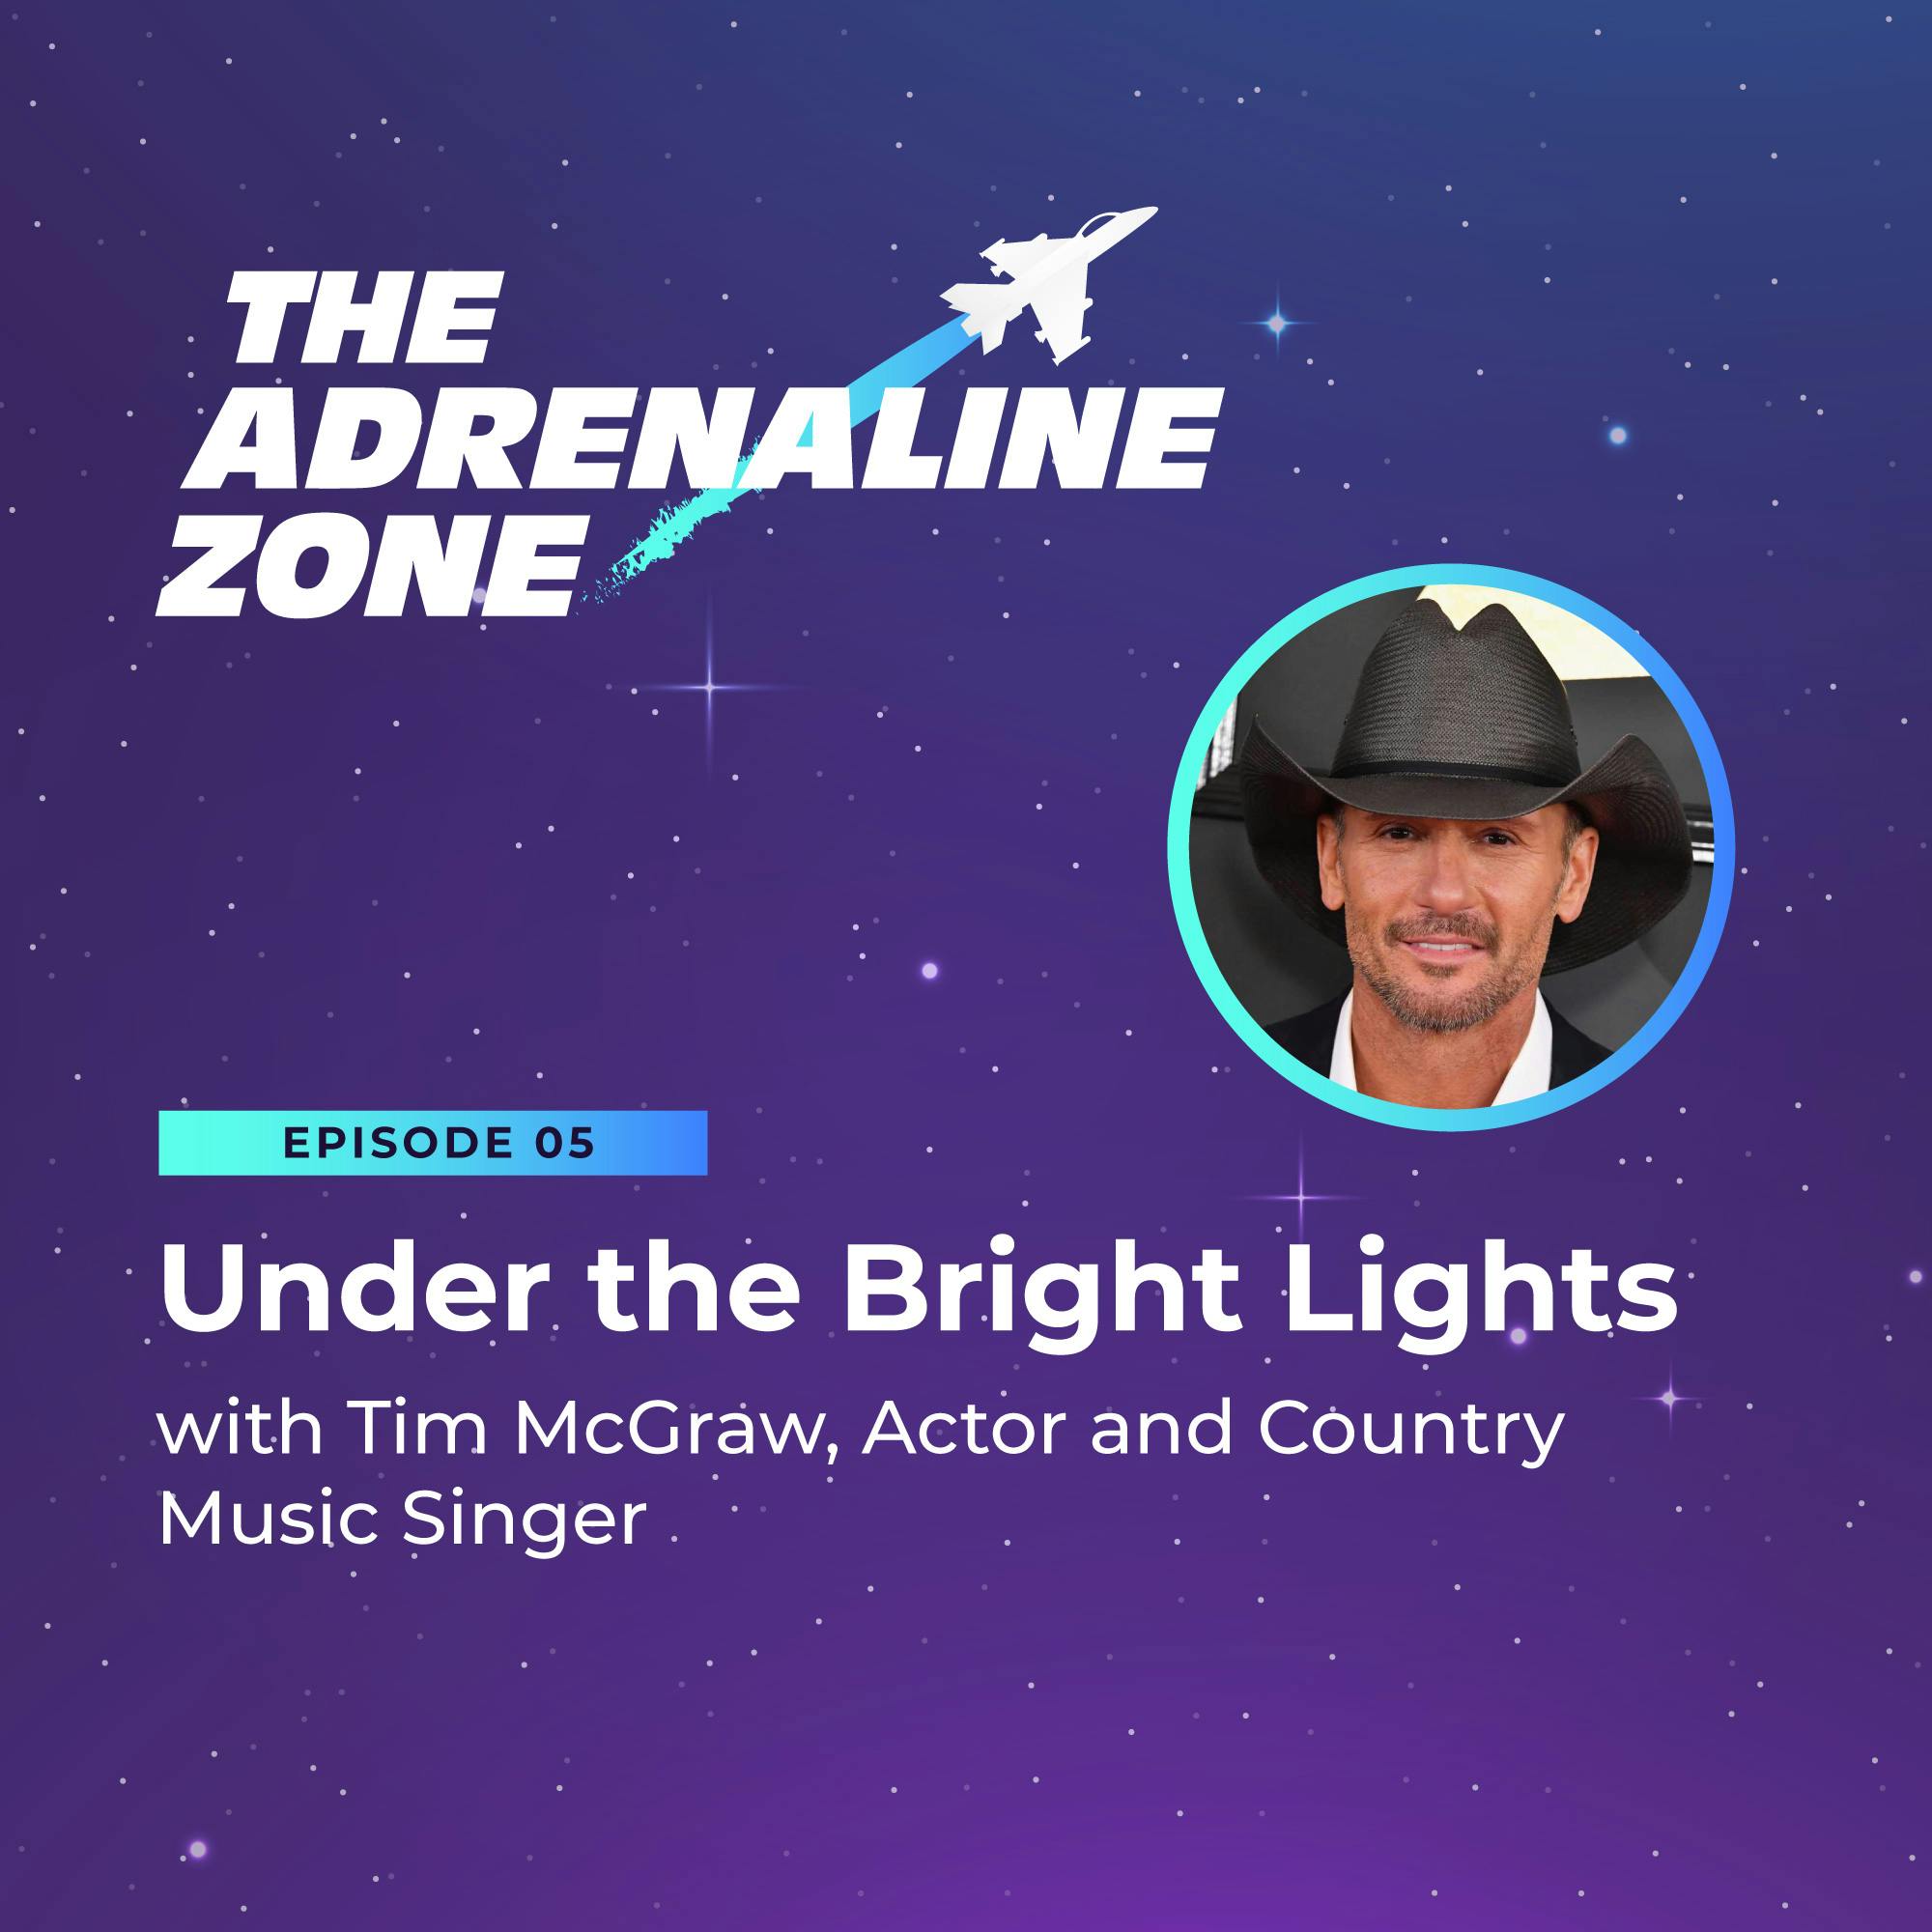 Under the Bright Lights with Tim McGraw, Actor and Country Music Singer